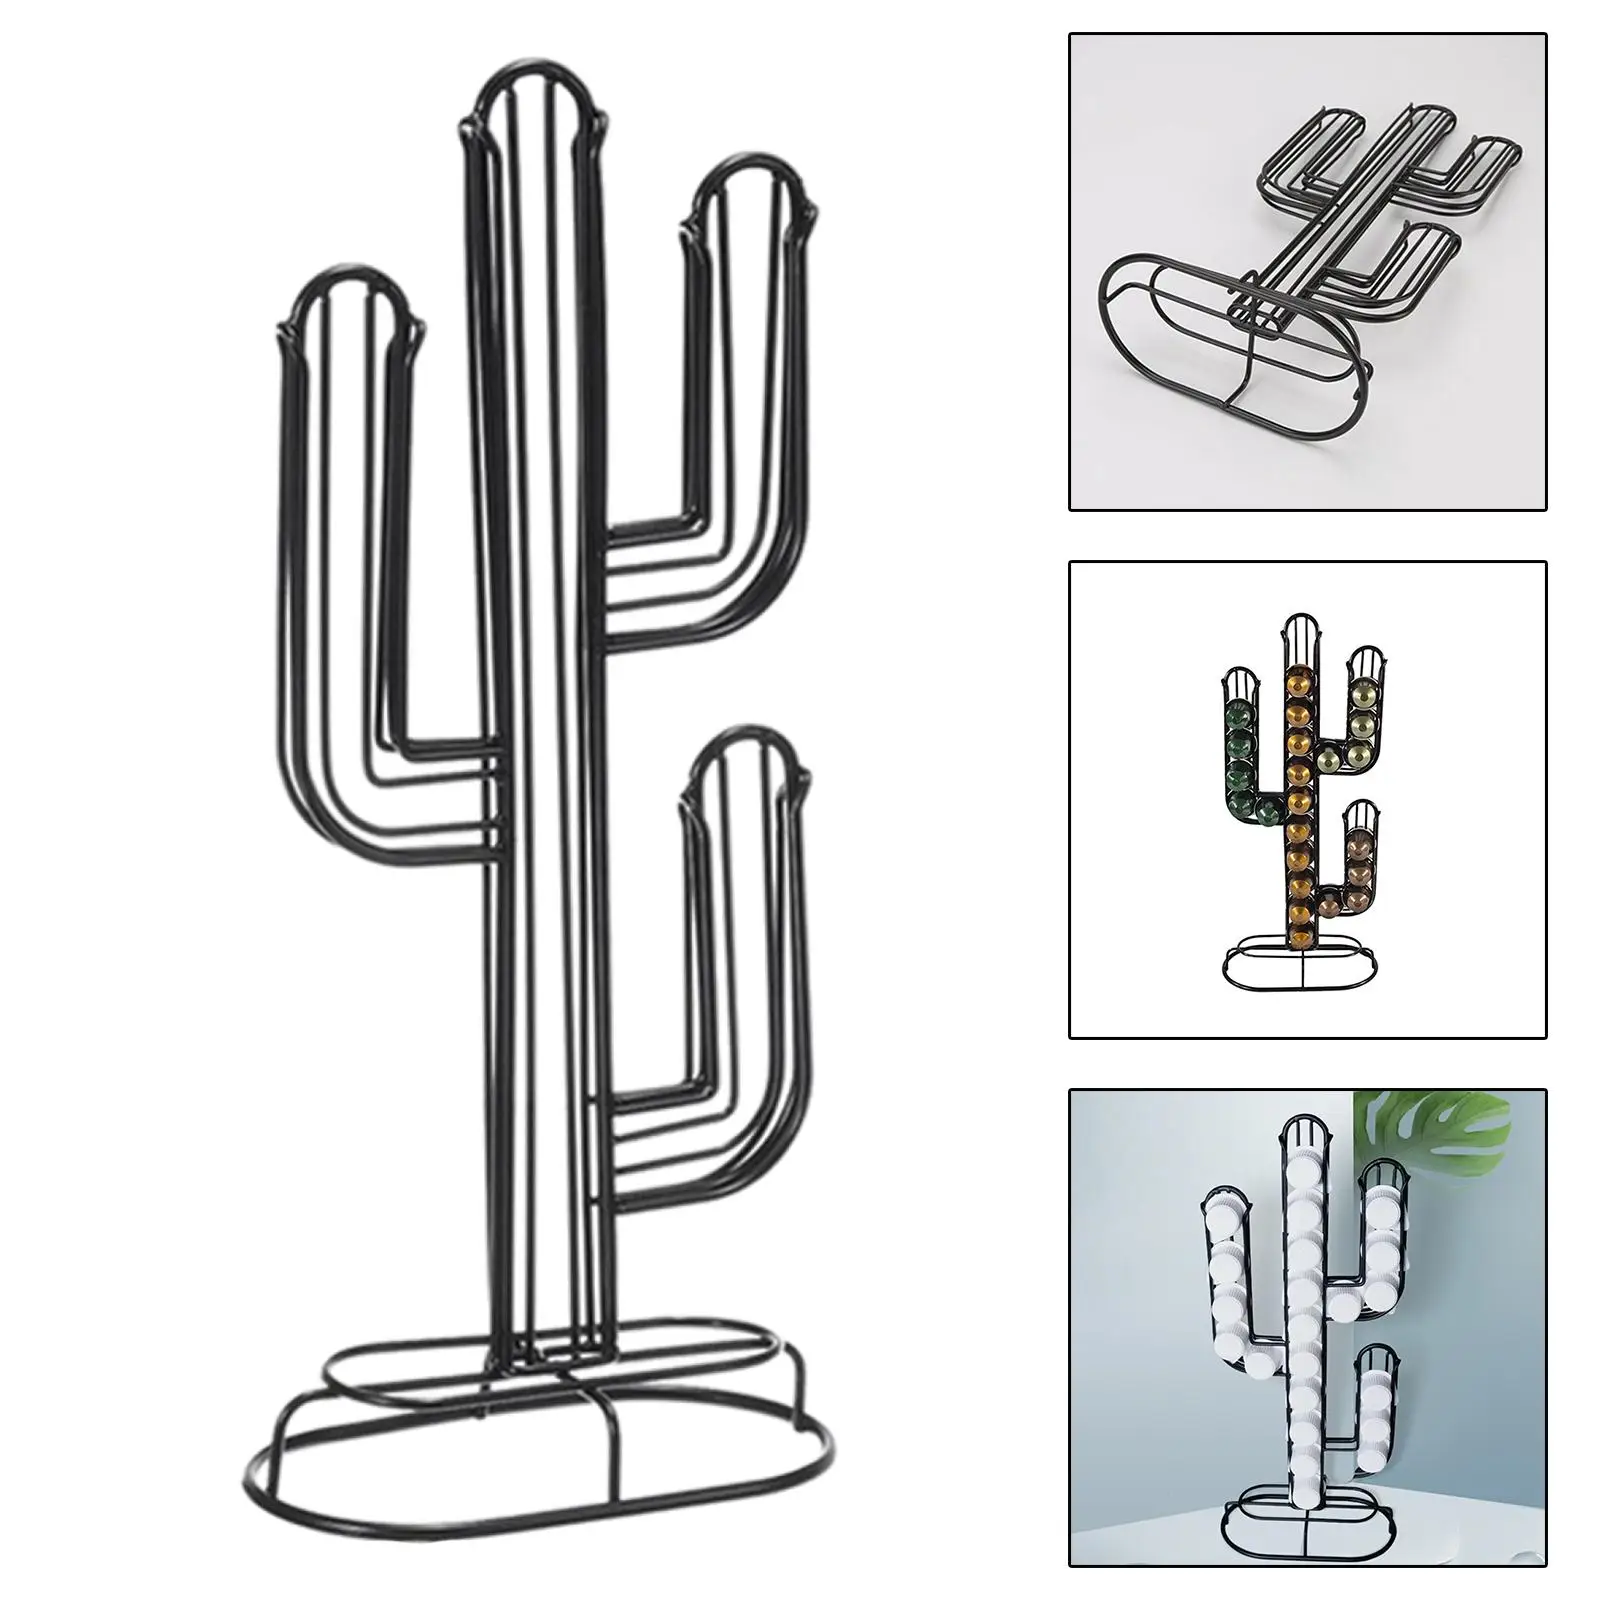 Cactus Design Coffee Capsule Holder Space Saving No Assembly Required Coffee Pod Rack for Kitchen Bar Home Housewarming Gifts